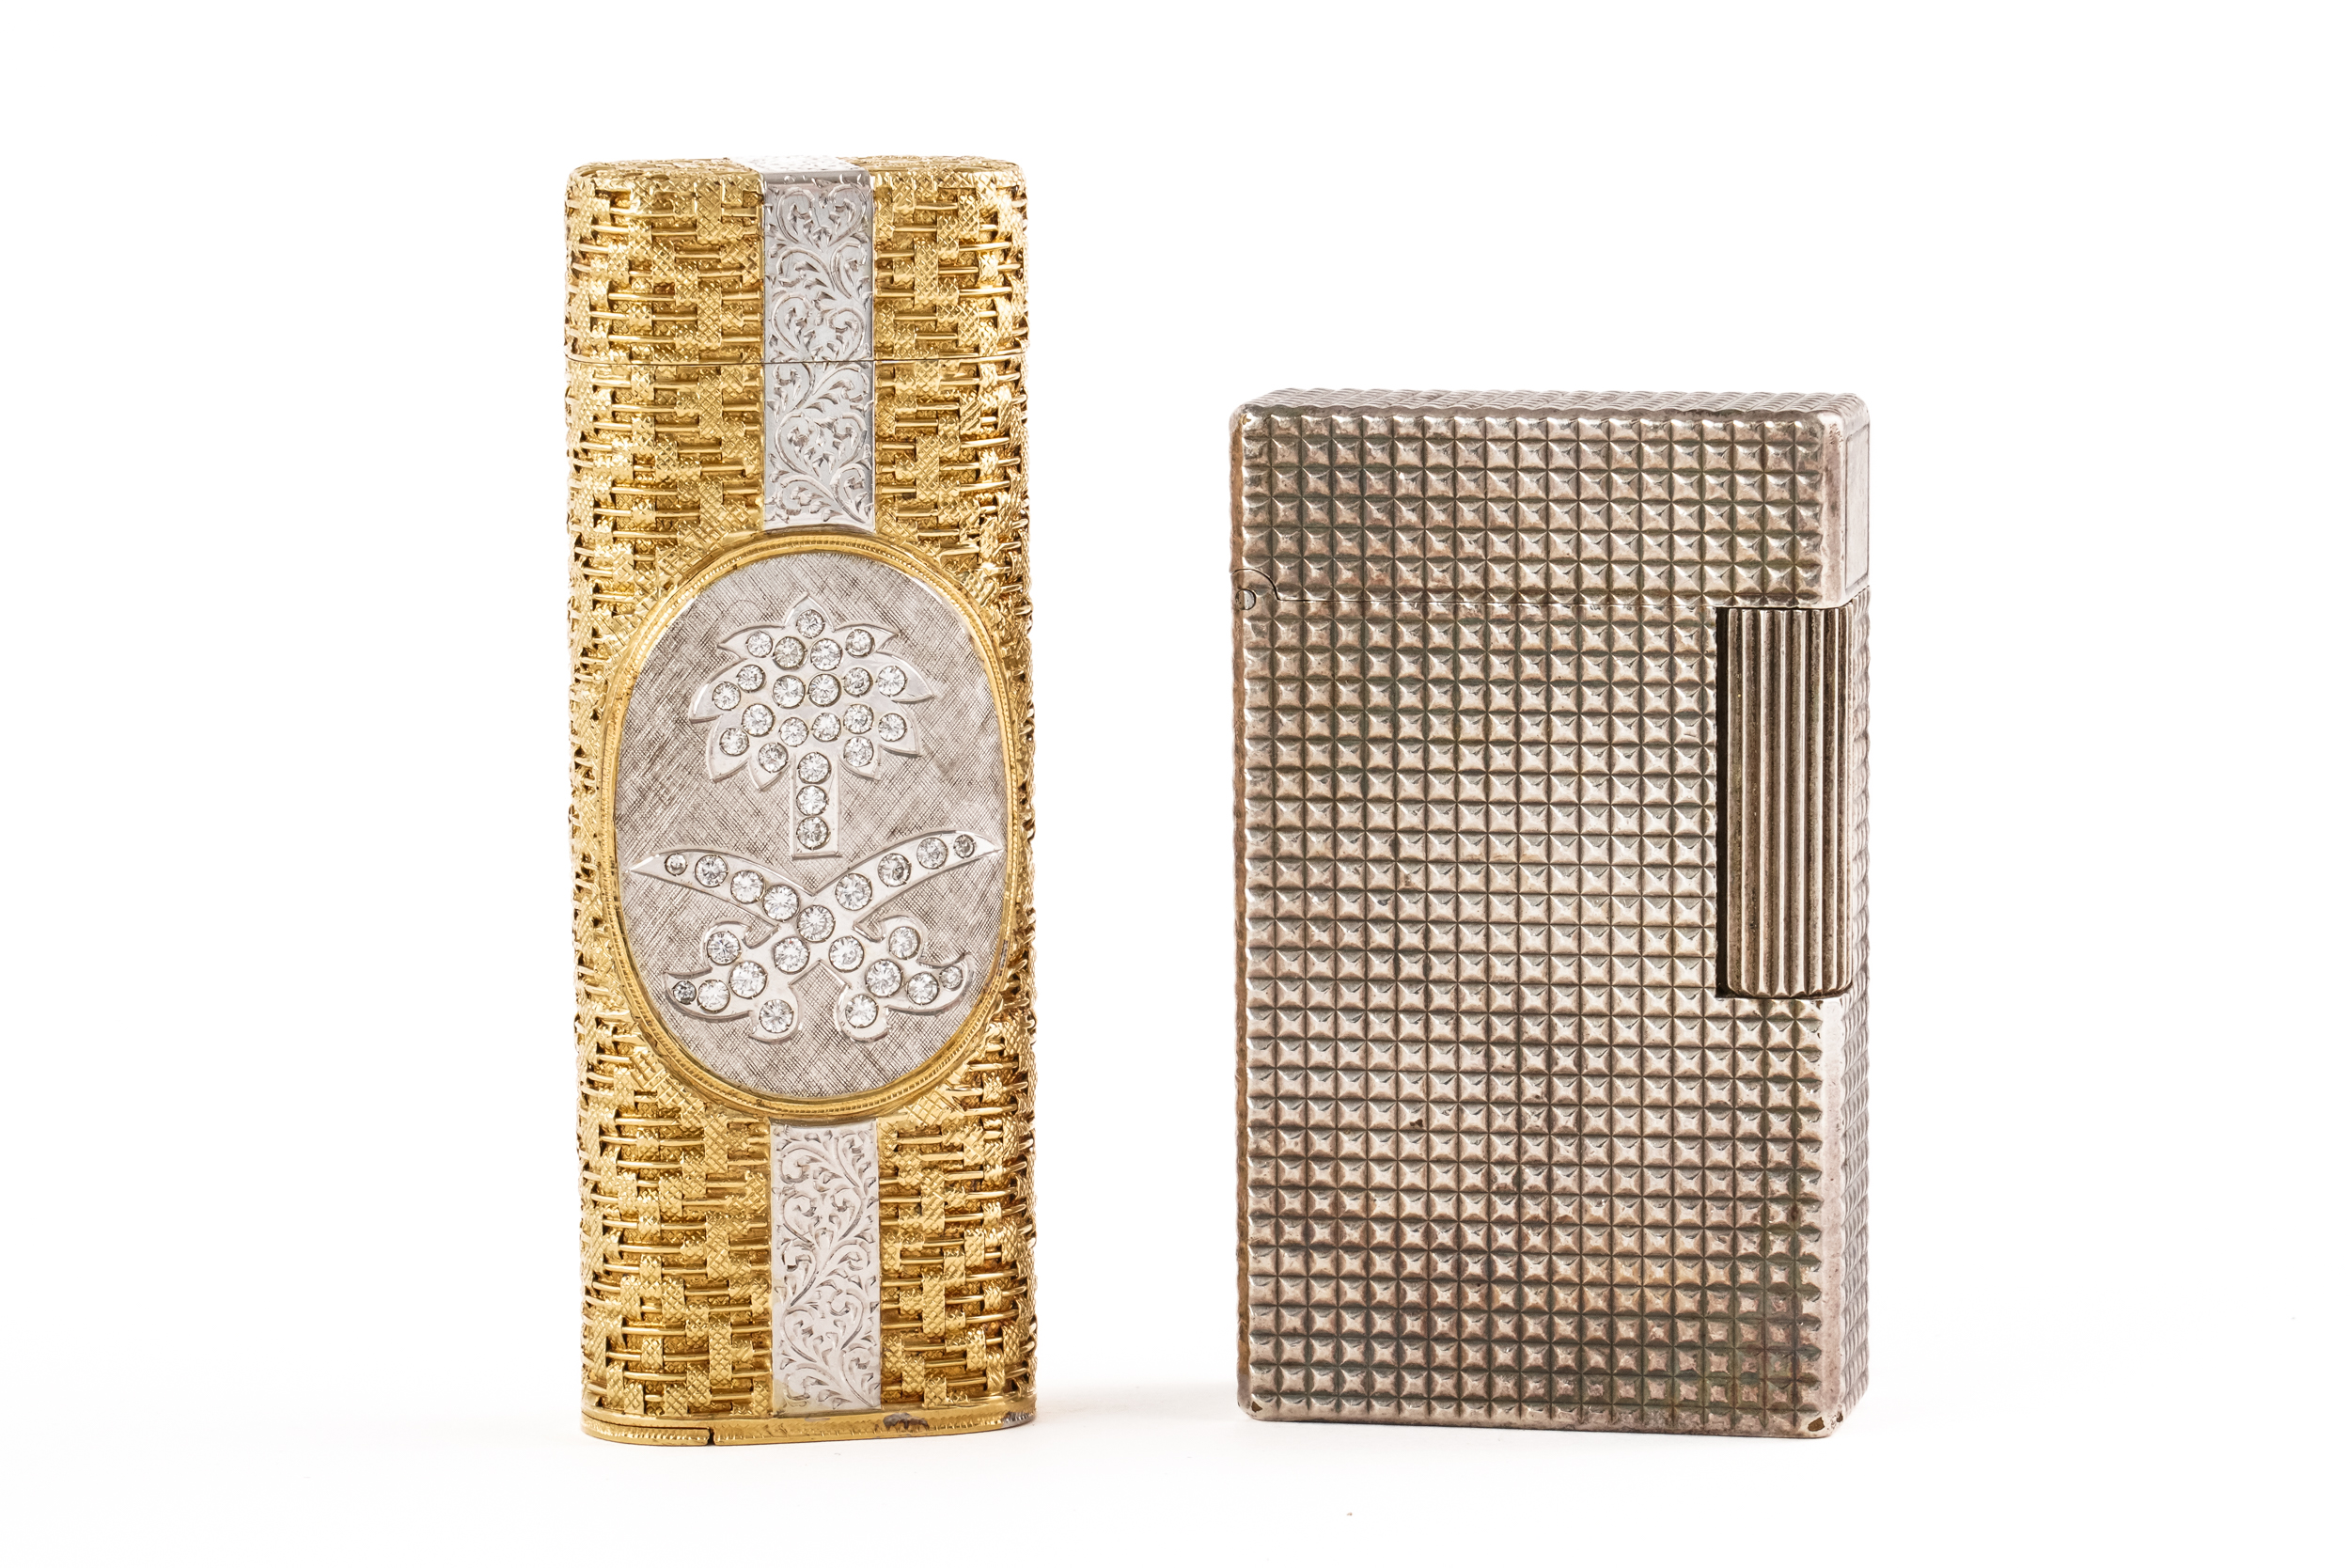 A GOLD AND DIAMOND SET LIGHTER AND ANOTHER LIGHTER, BOTH BOXED (4) - Image 4 of 6